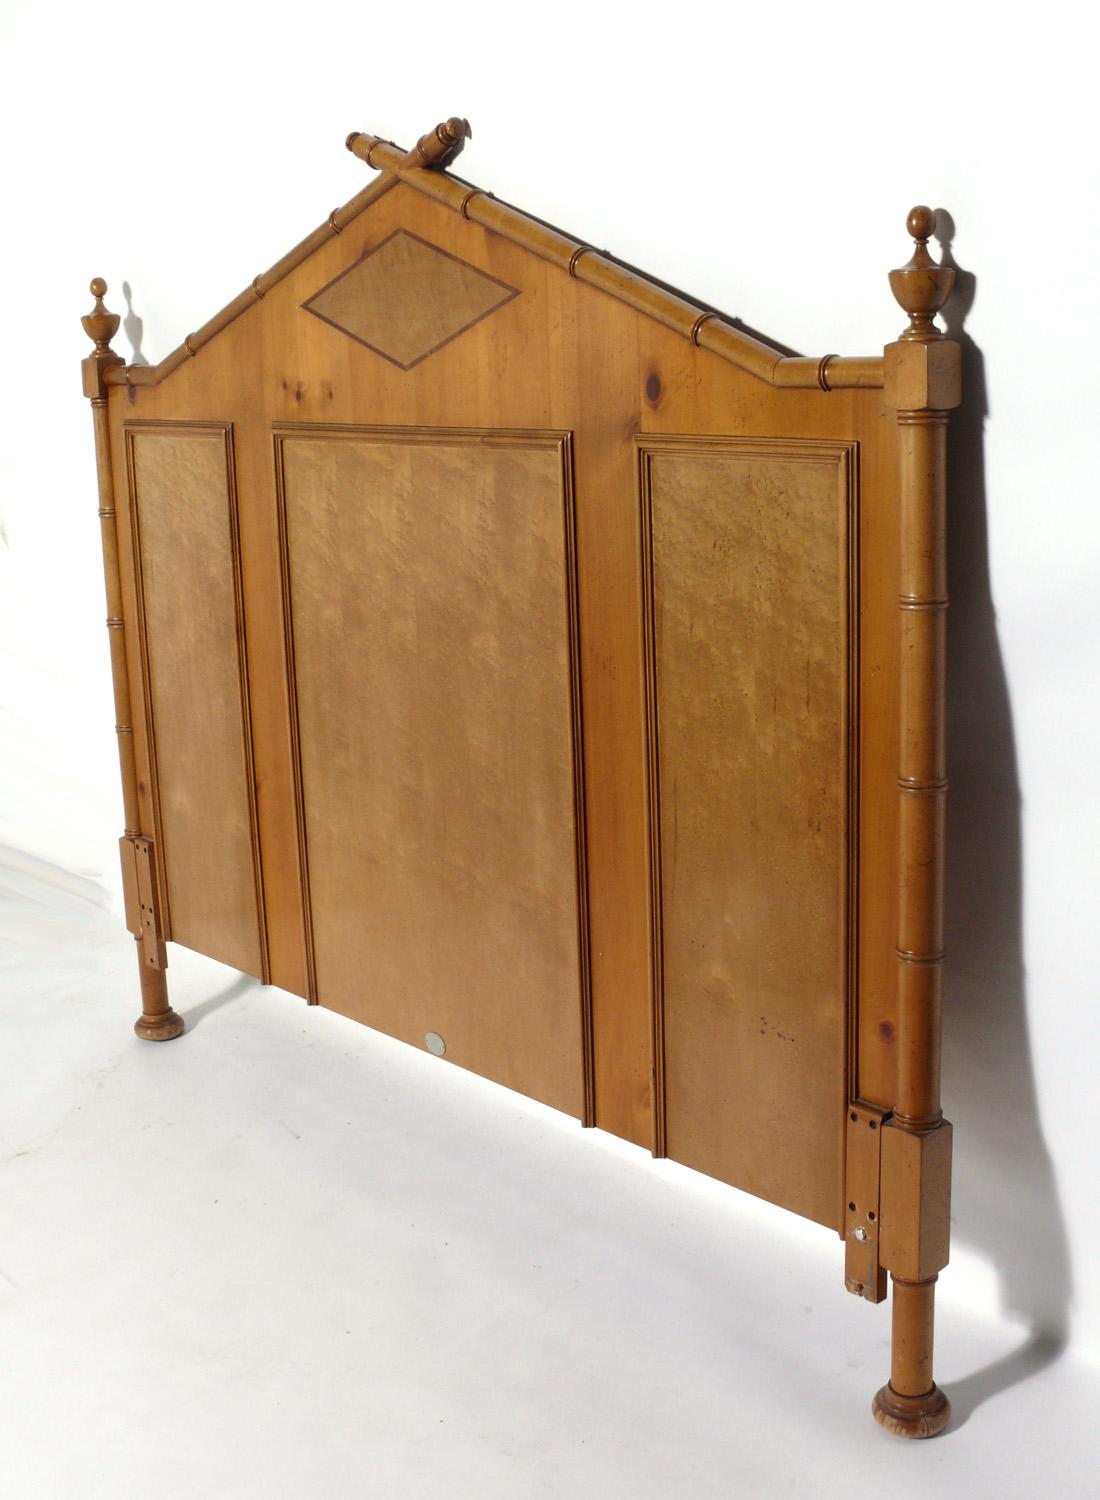 Baker faux bamboo queen size headboard, American, circa 1960s. Connects to most Hollywood style bed frames.